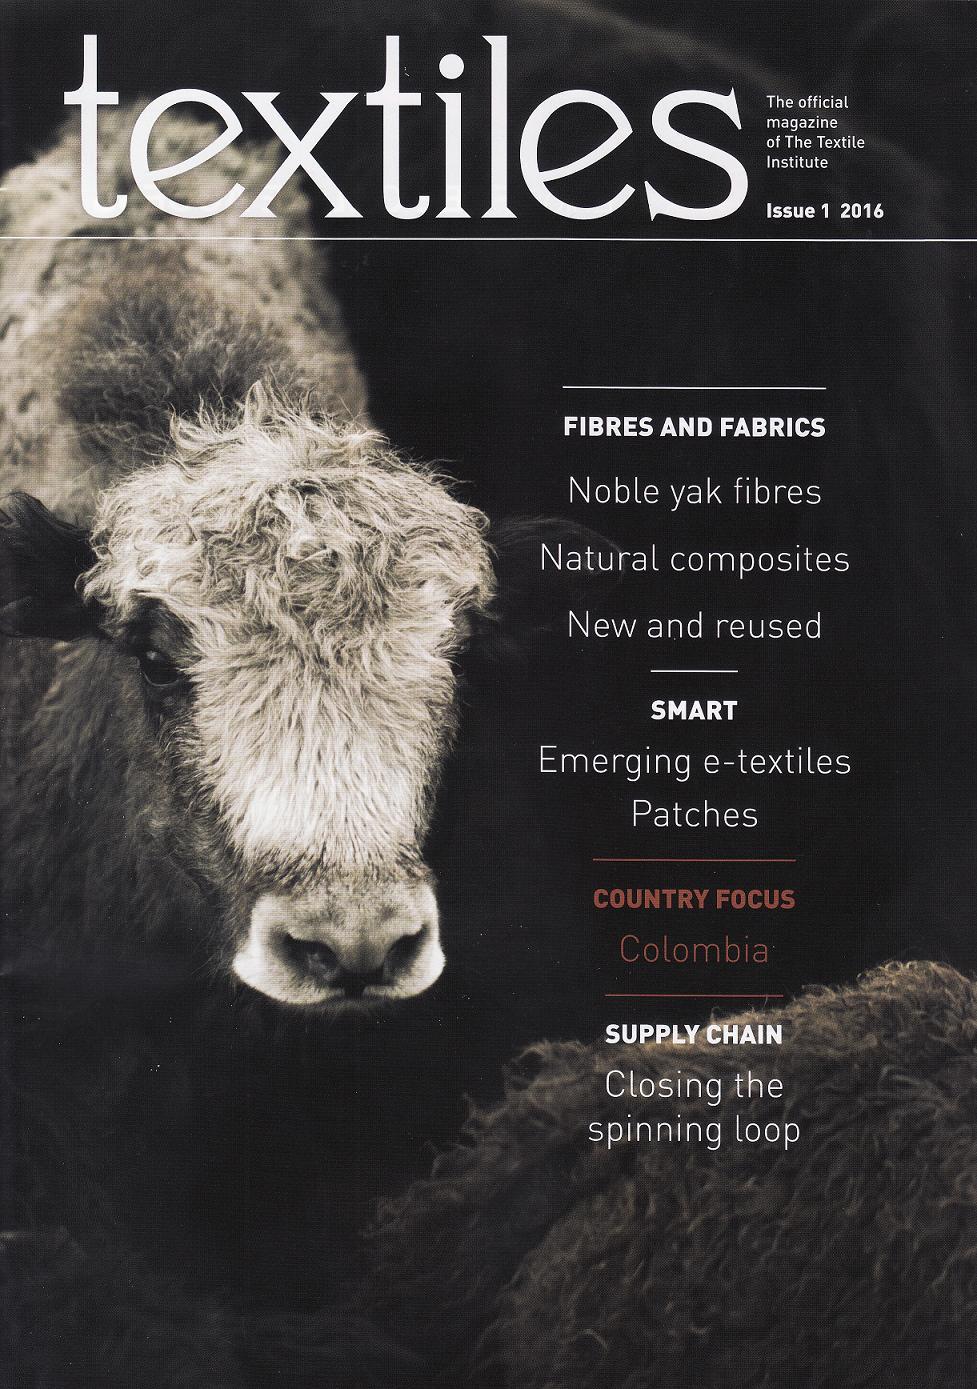 Textiles - The official magazine of The Textile Institute